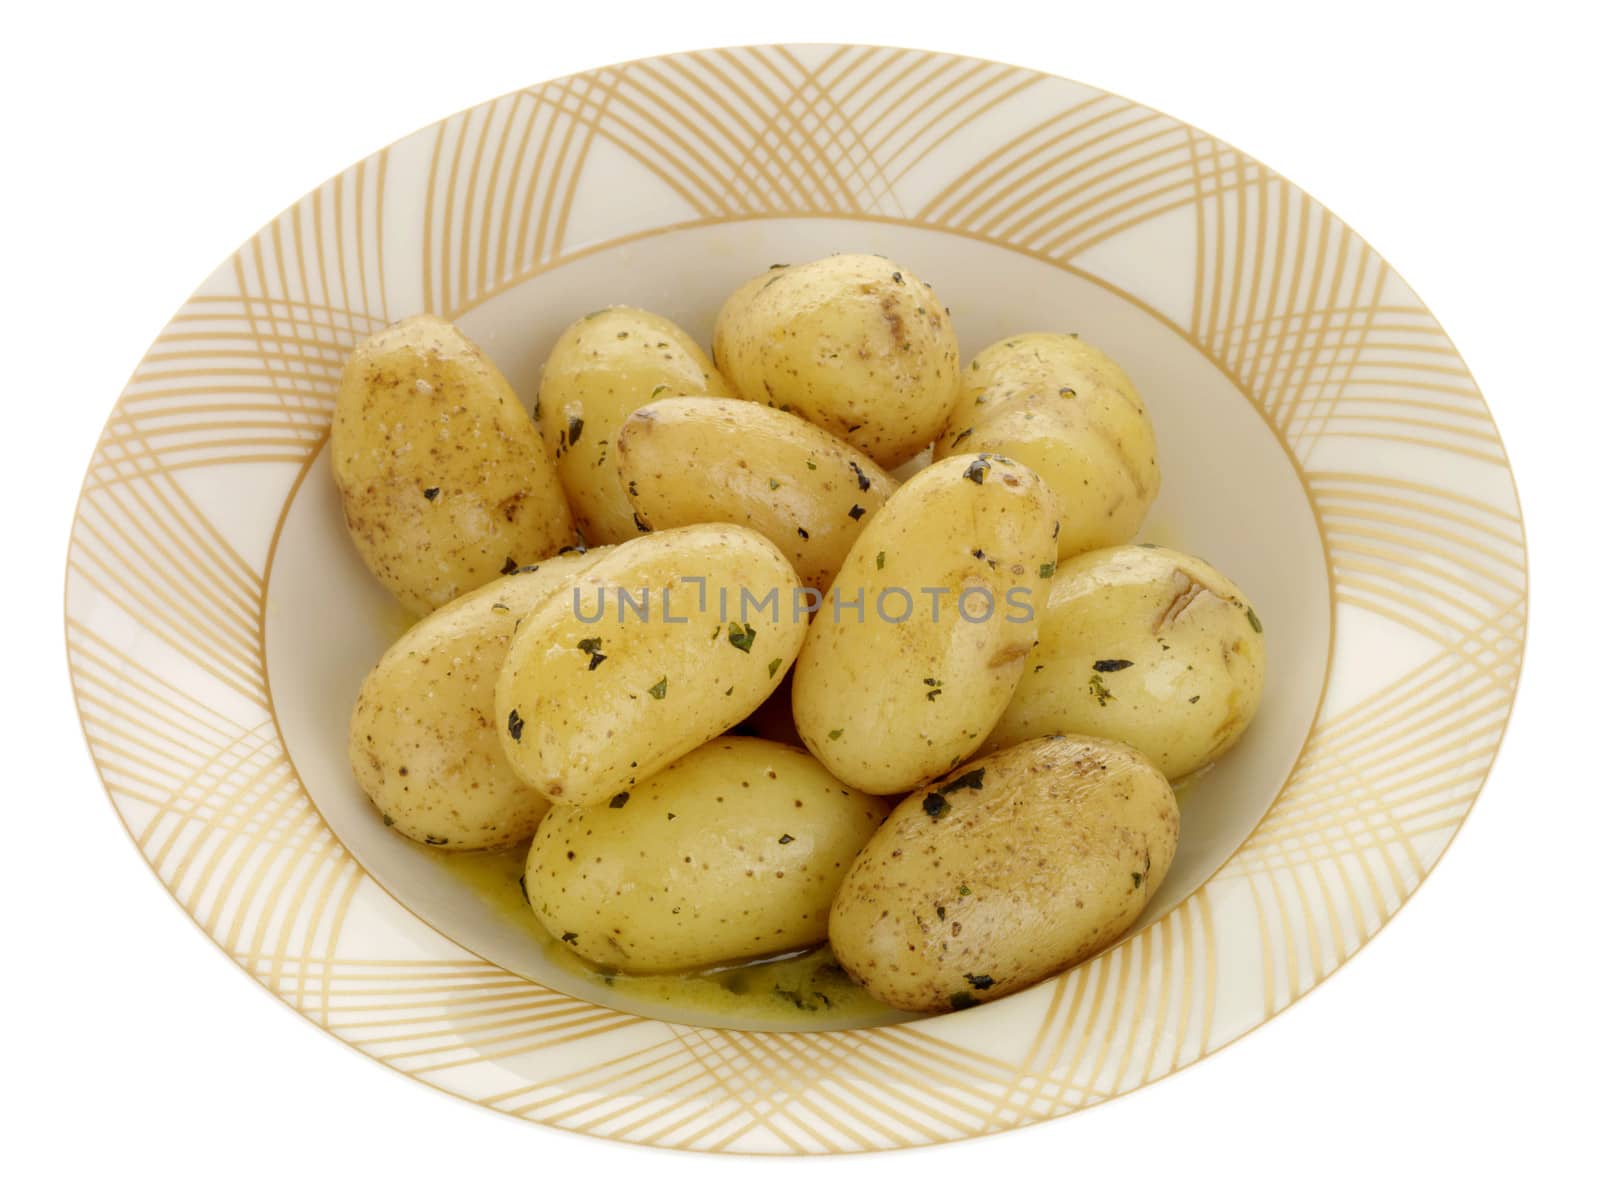 Bowl of New Potatoes by Whiteboxmedia